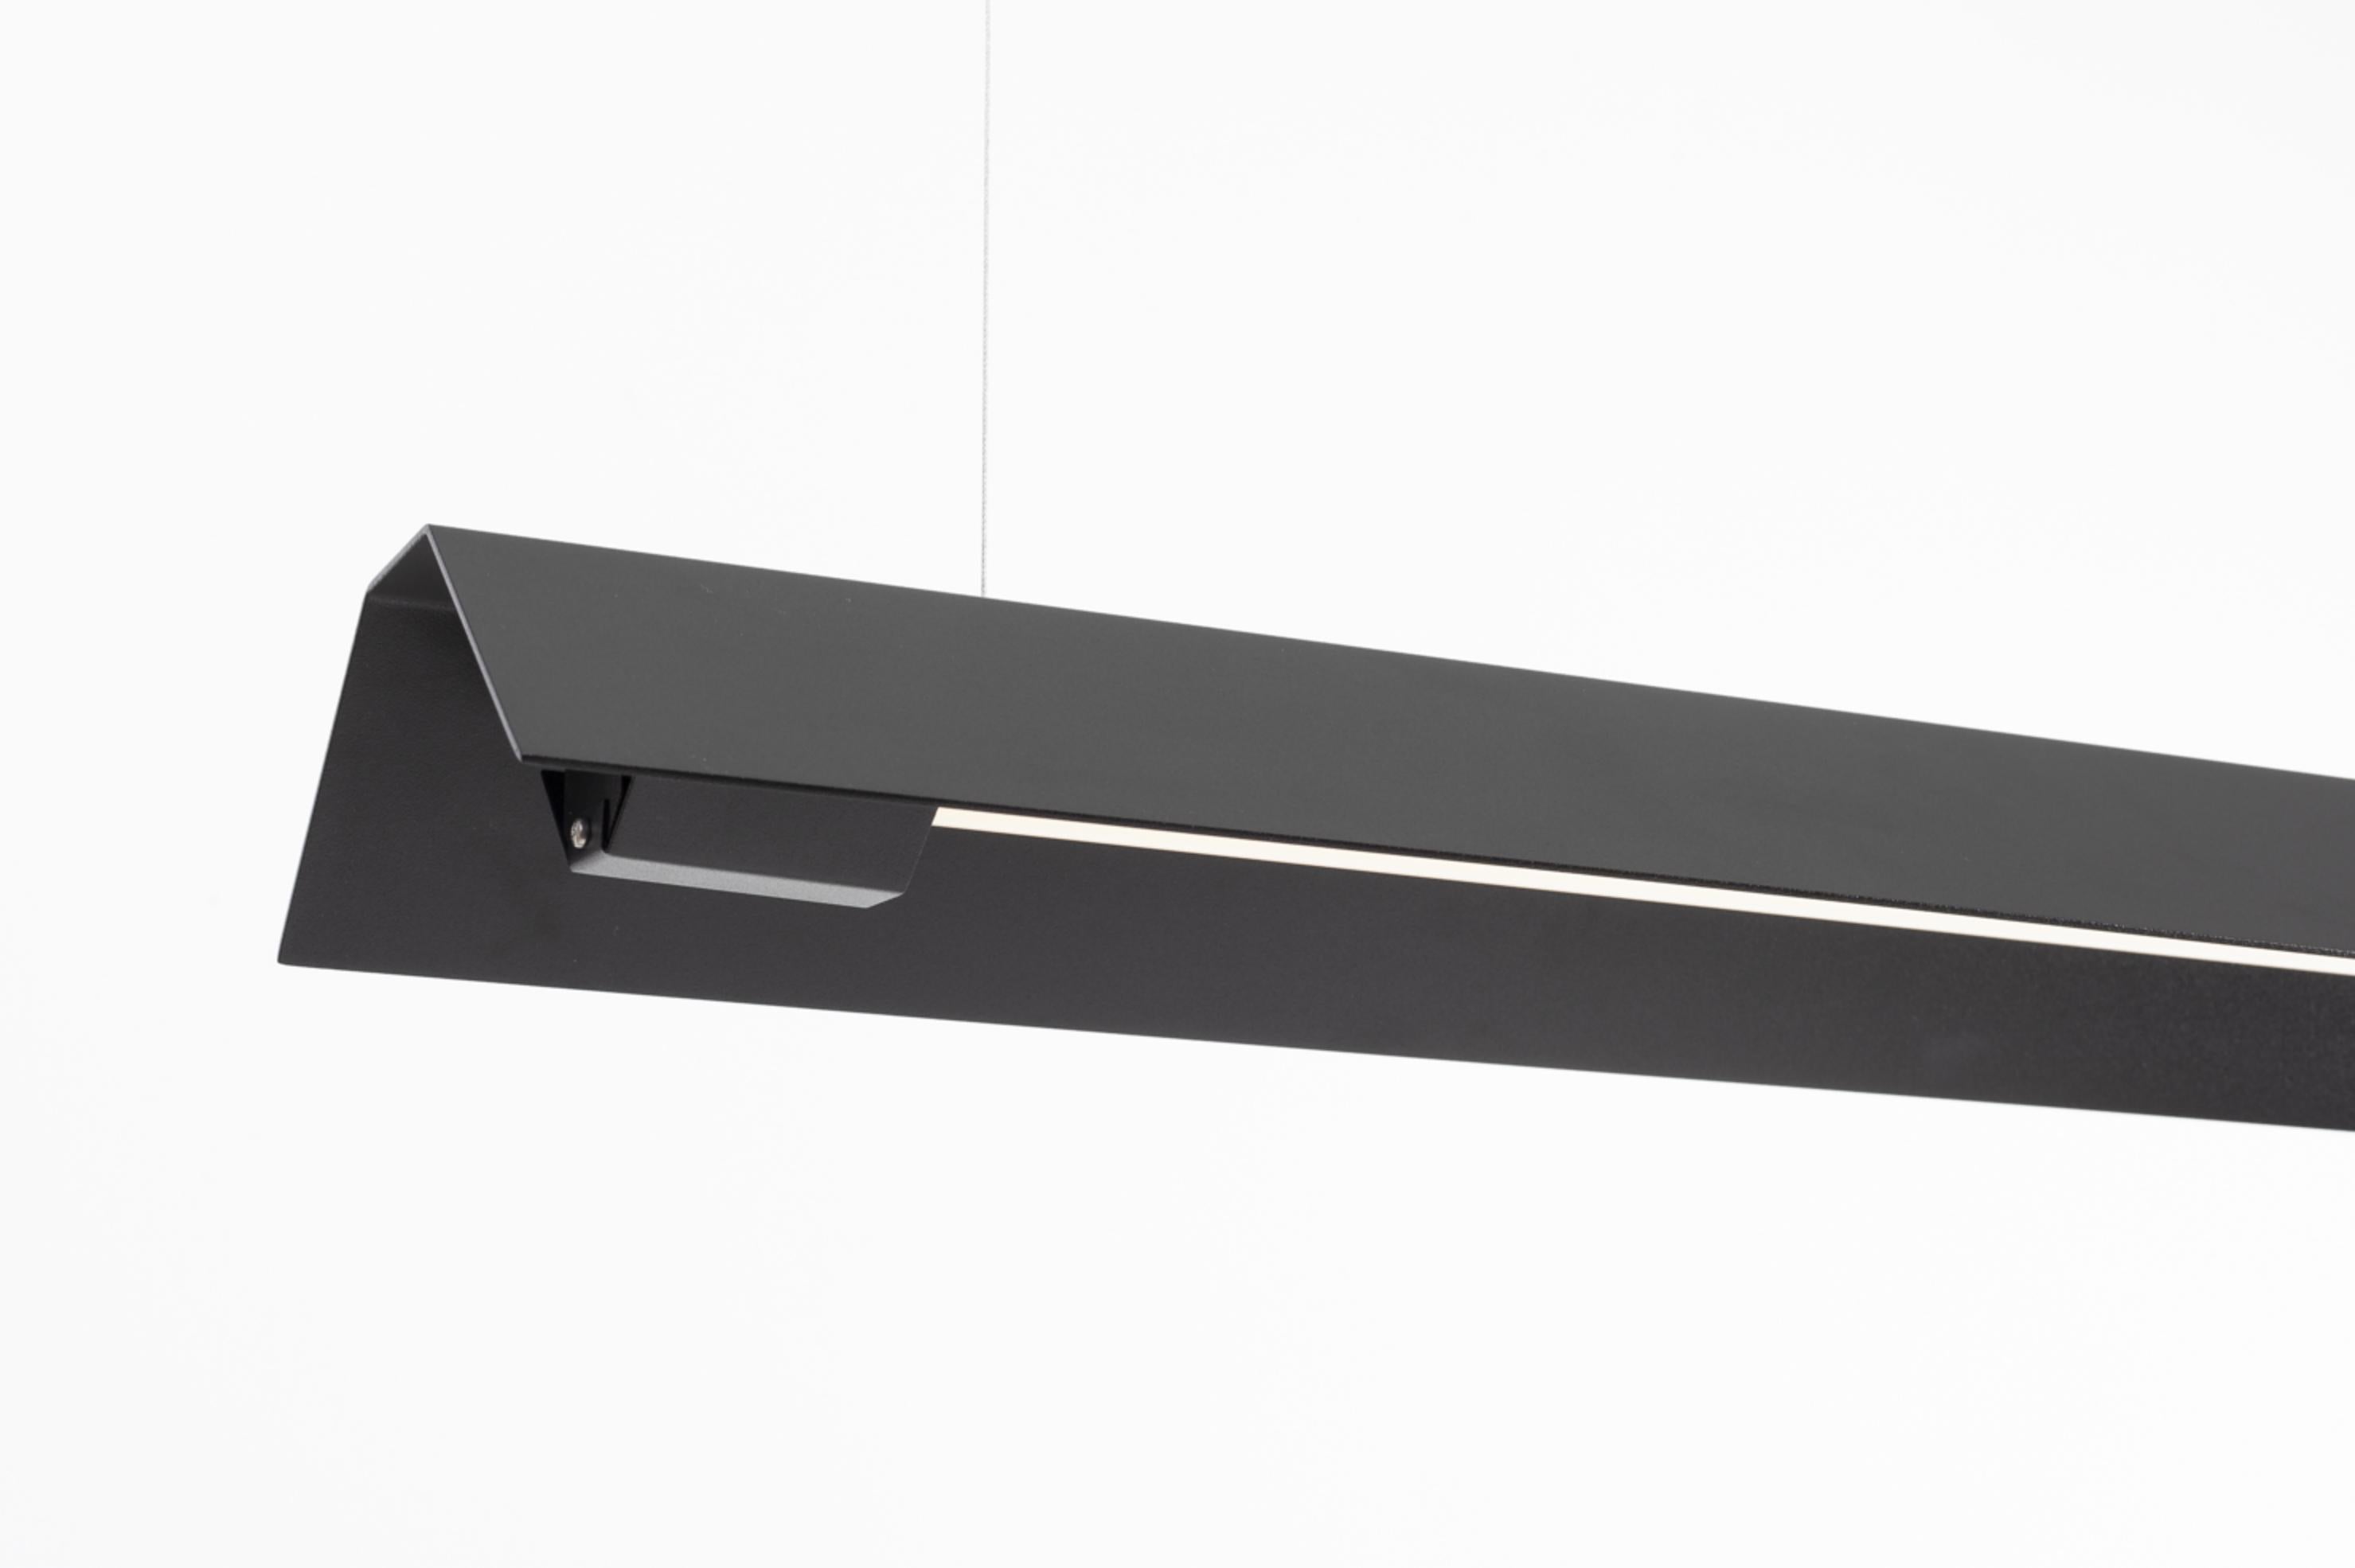 Medium Misalliance Ral Jet Black Suspended Light by Lexavala
Dimensions: D 16 x W 100 x H 8 cm
Materials: powder coated aluminium.

There are two lenghts of socket covers, extending over the LED. Two short are to be found in Suspended and